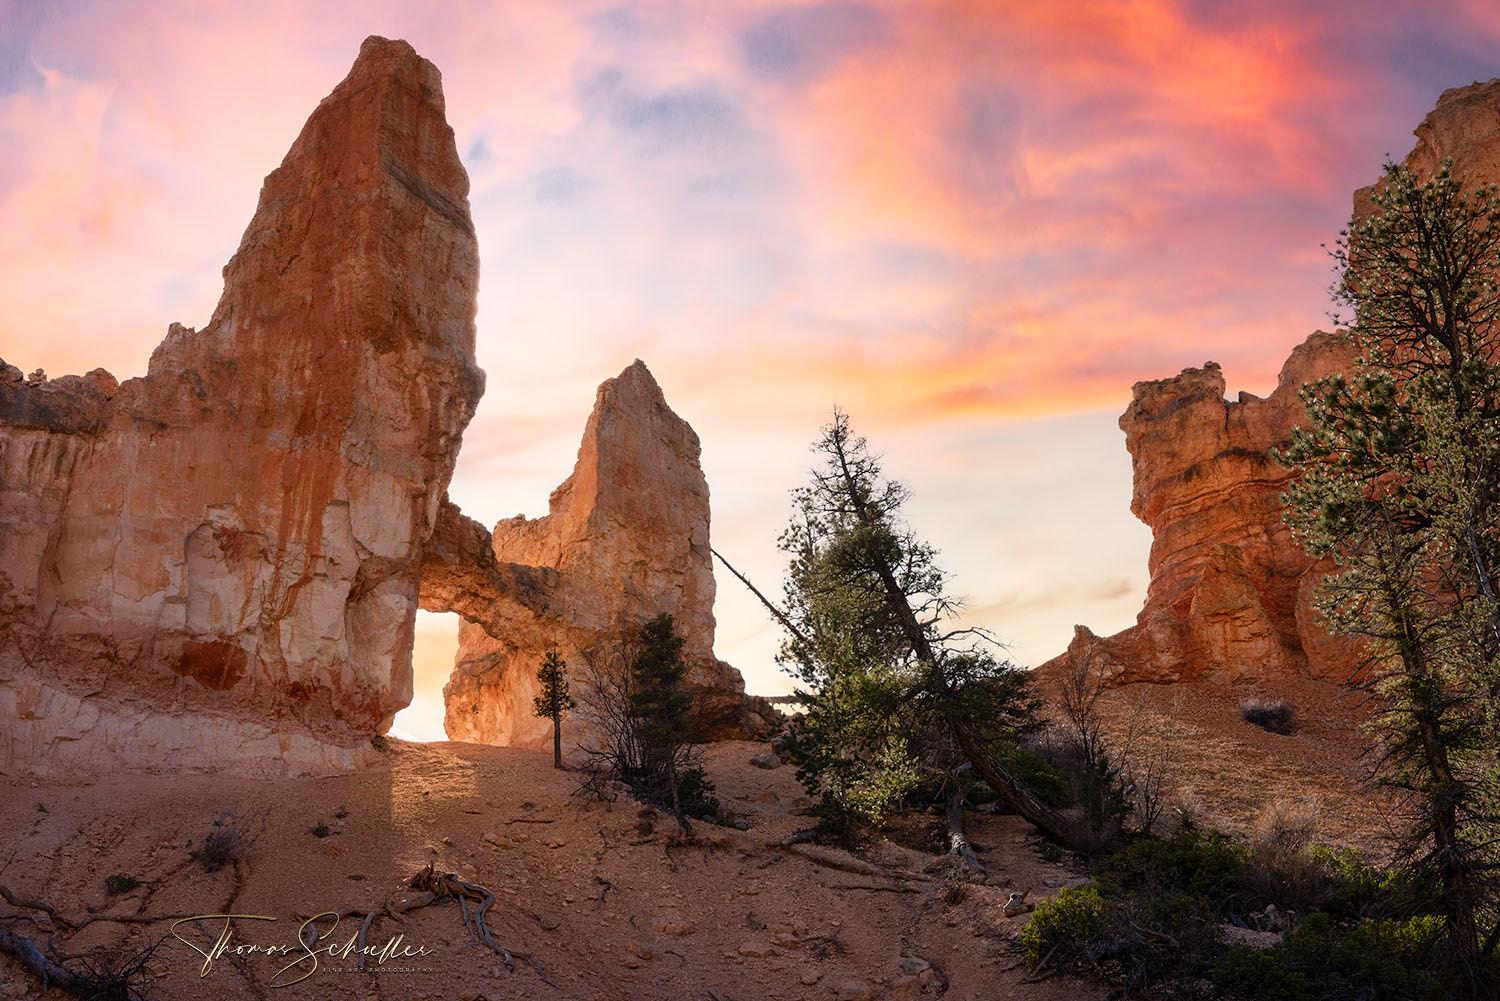 Tower Bridge is one of Bryce Canyons prettiest natural Arches photographed against a high-desert sunset sky | Luxury Edition Fine Art Prints 